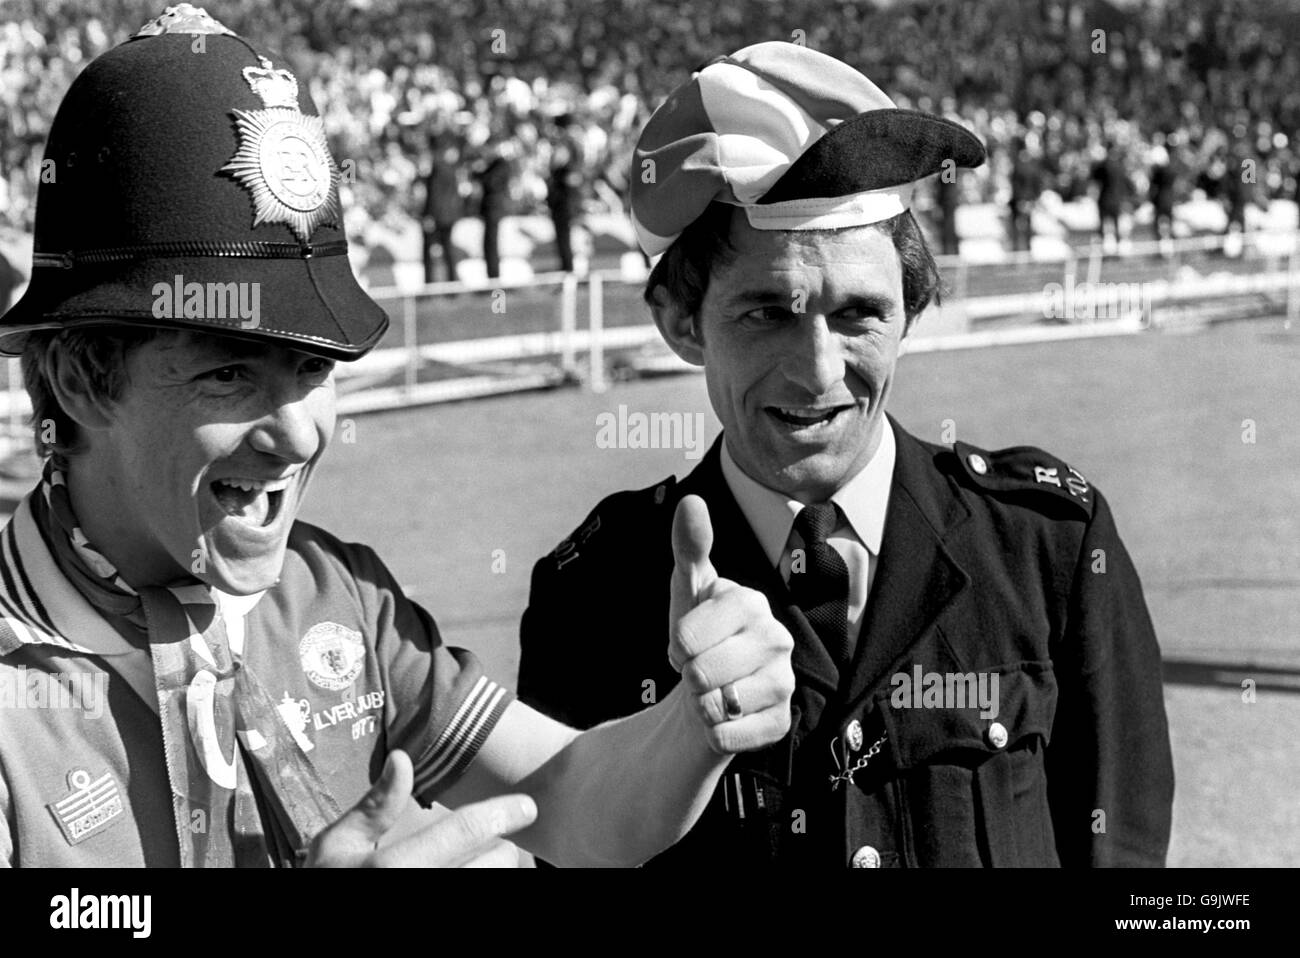 Soccer - FA Cup Final - Liverpool v Manchester United - Wembley Stadium. Manchester United's Gordon Hill (l) celebrates his team's victory with a policeman. Stock Photo